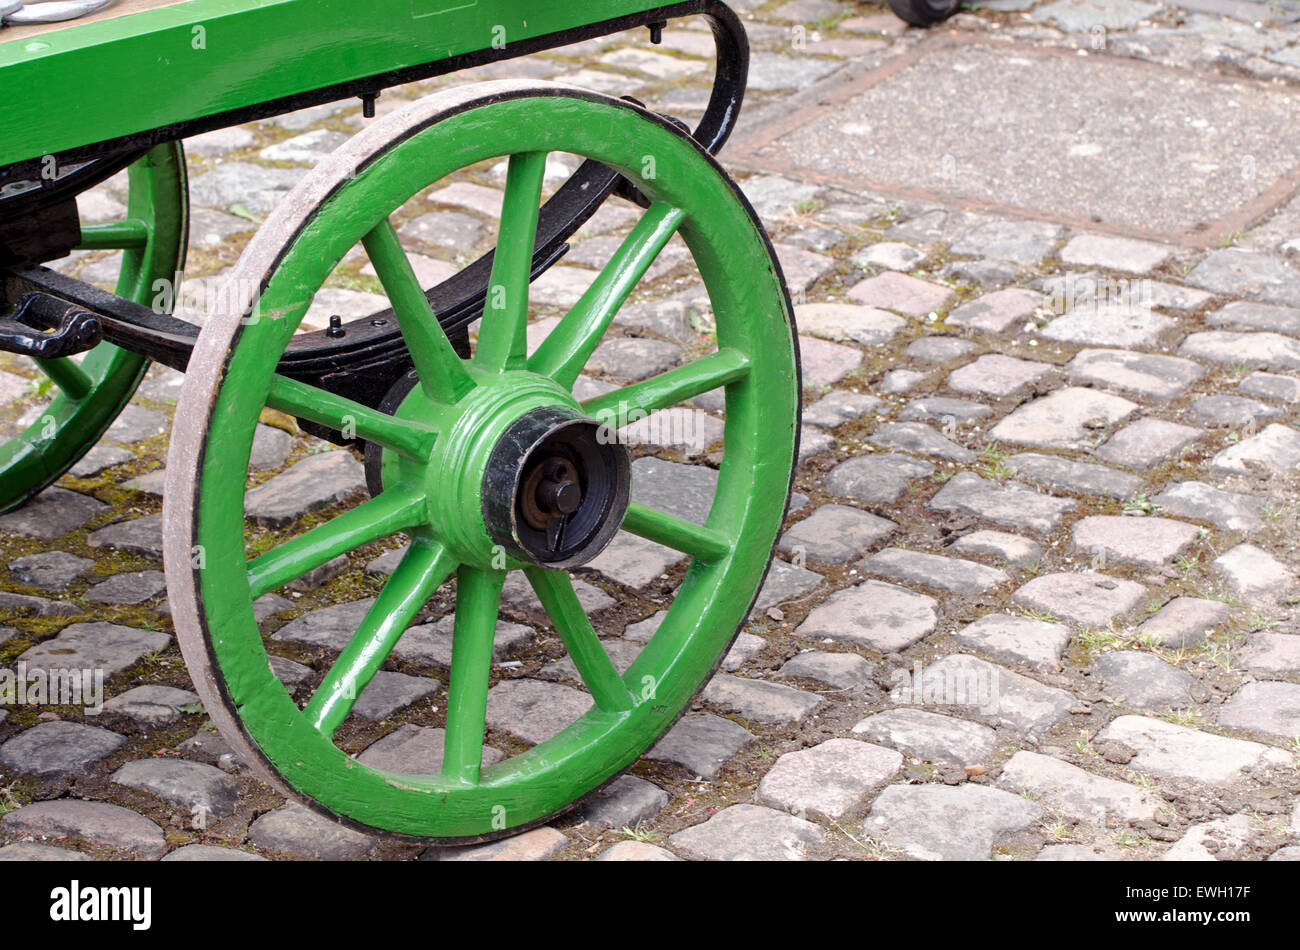 Wooden wheel and iron rim - detail of an old-fashioned wood and iron cart standing on a cobbled surface of granite setts. Stock Photo